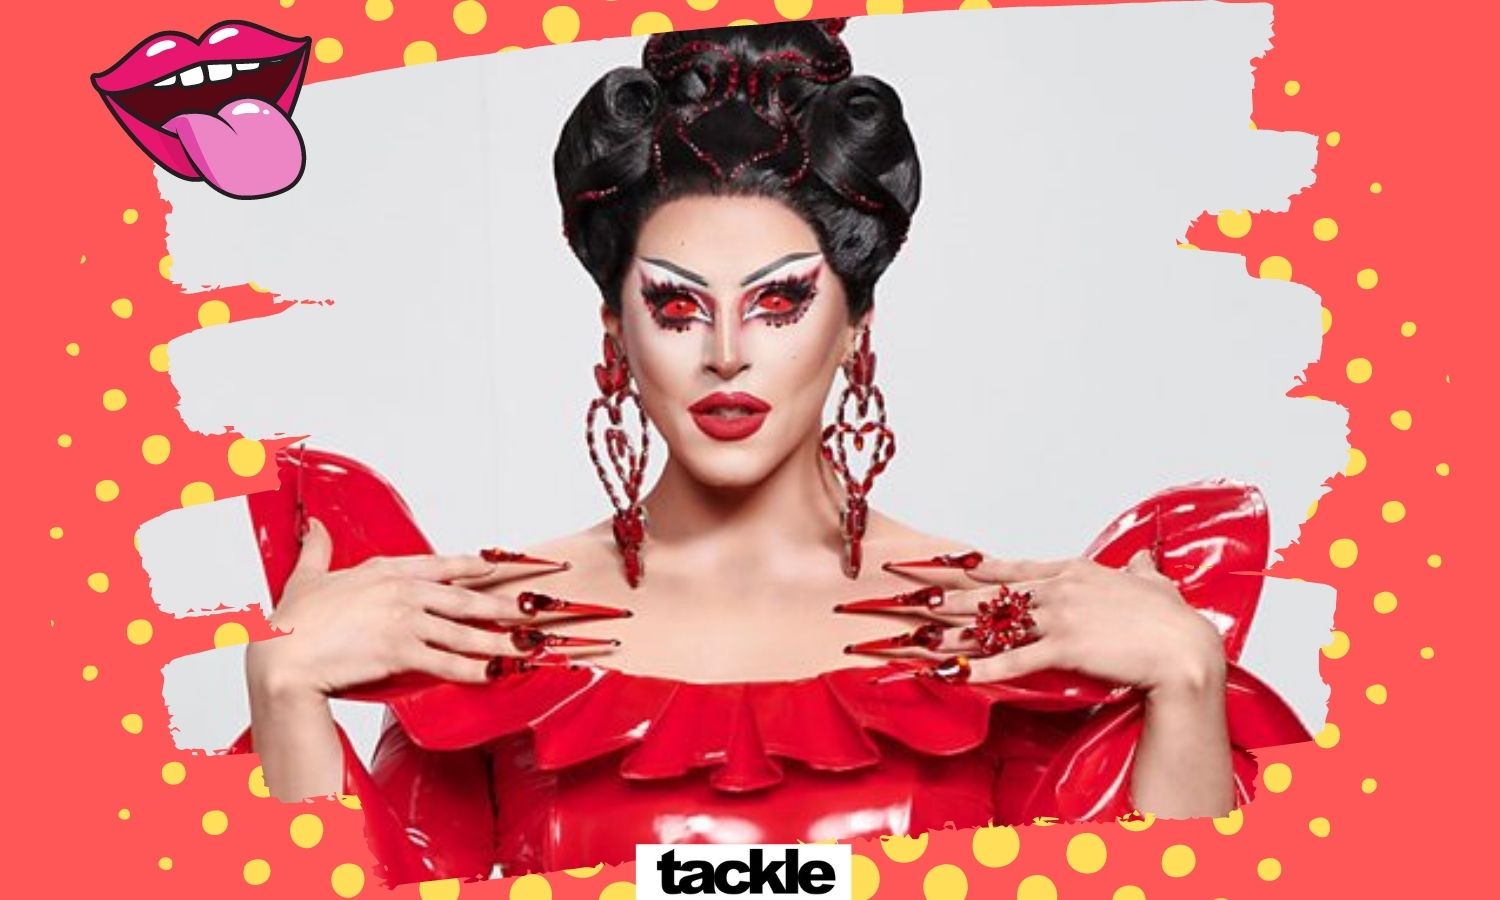 DRAG RACE UK: Who is Cherry Valentine and where is she from?